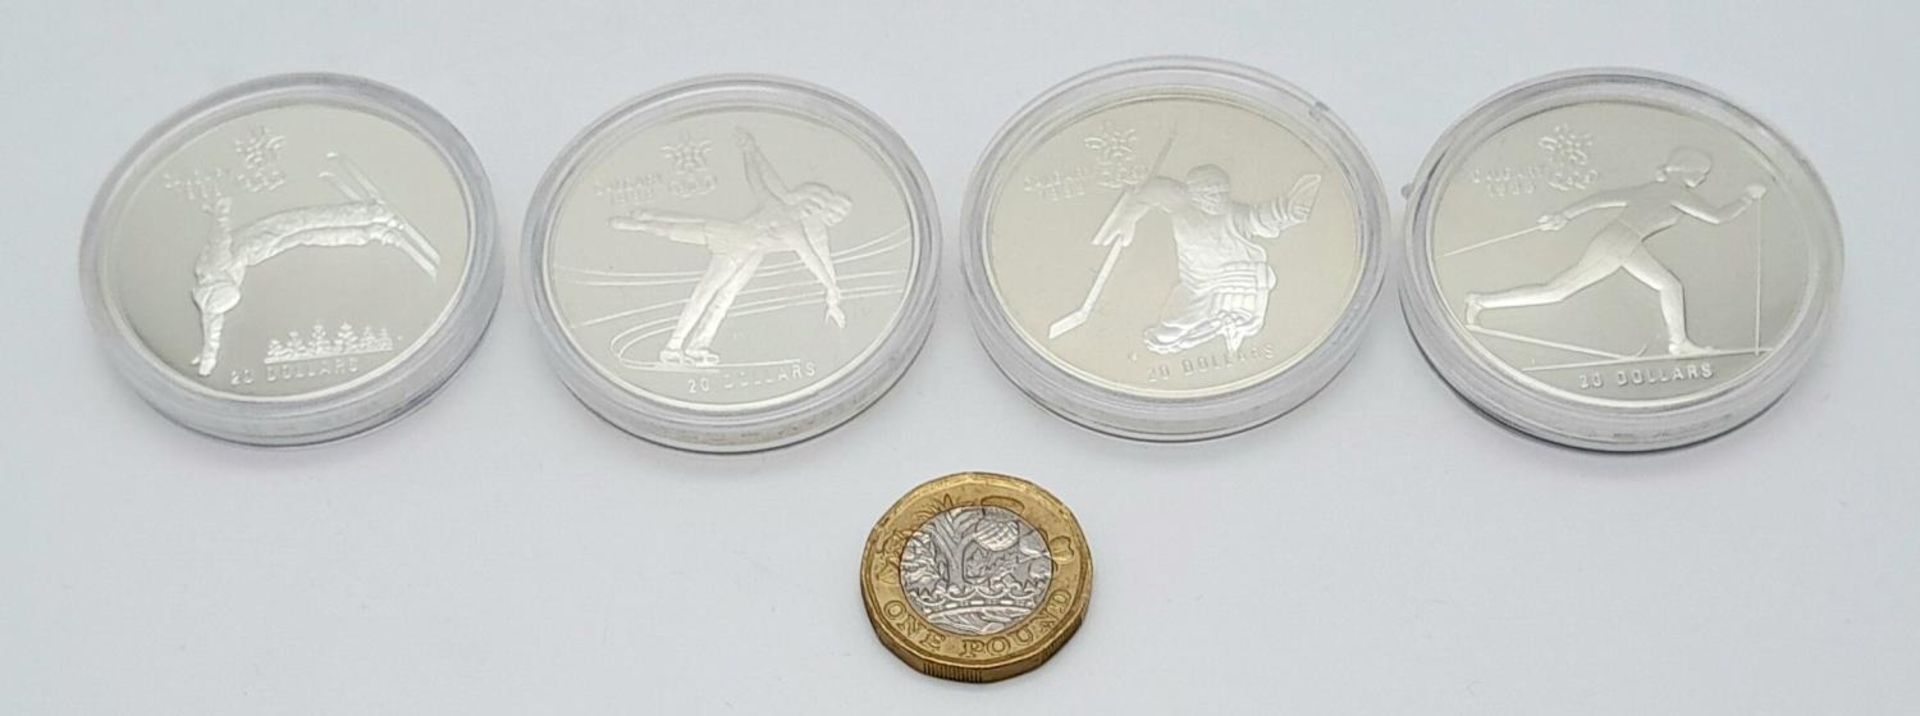 Four Commemorative 925 Silver Coins - Celebrating the 1986 Canadian Winter Games. Each coin weighs 1 - Image 5 of 5